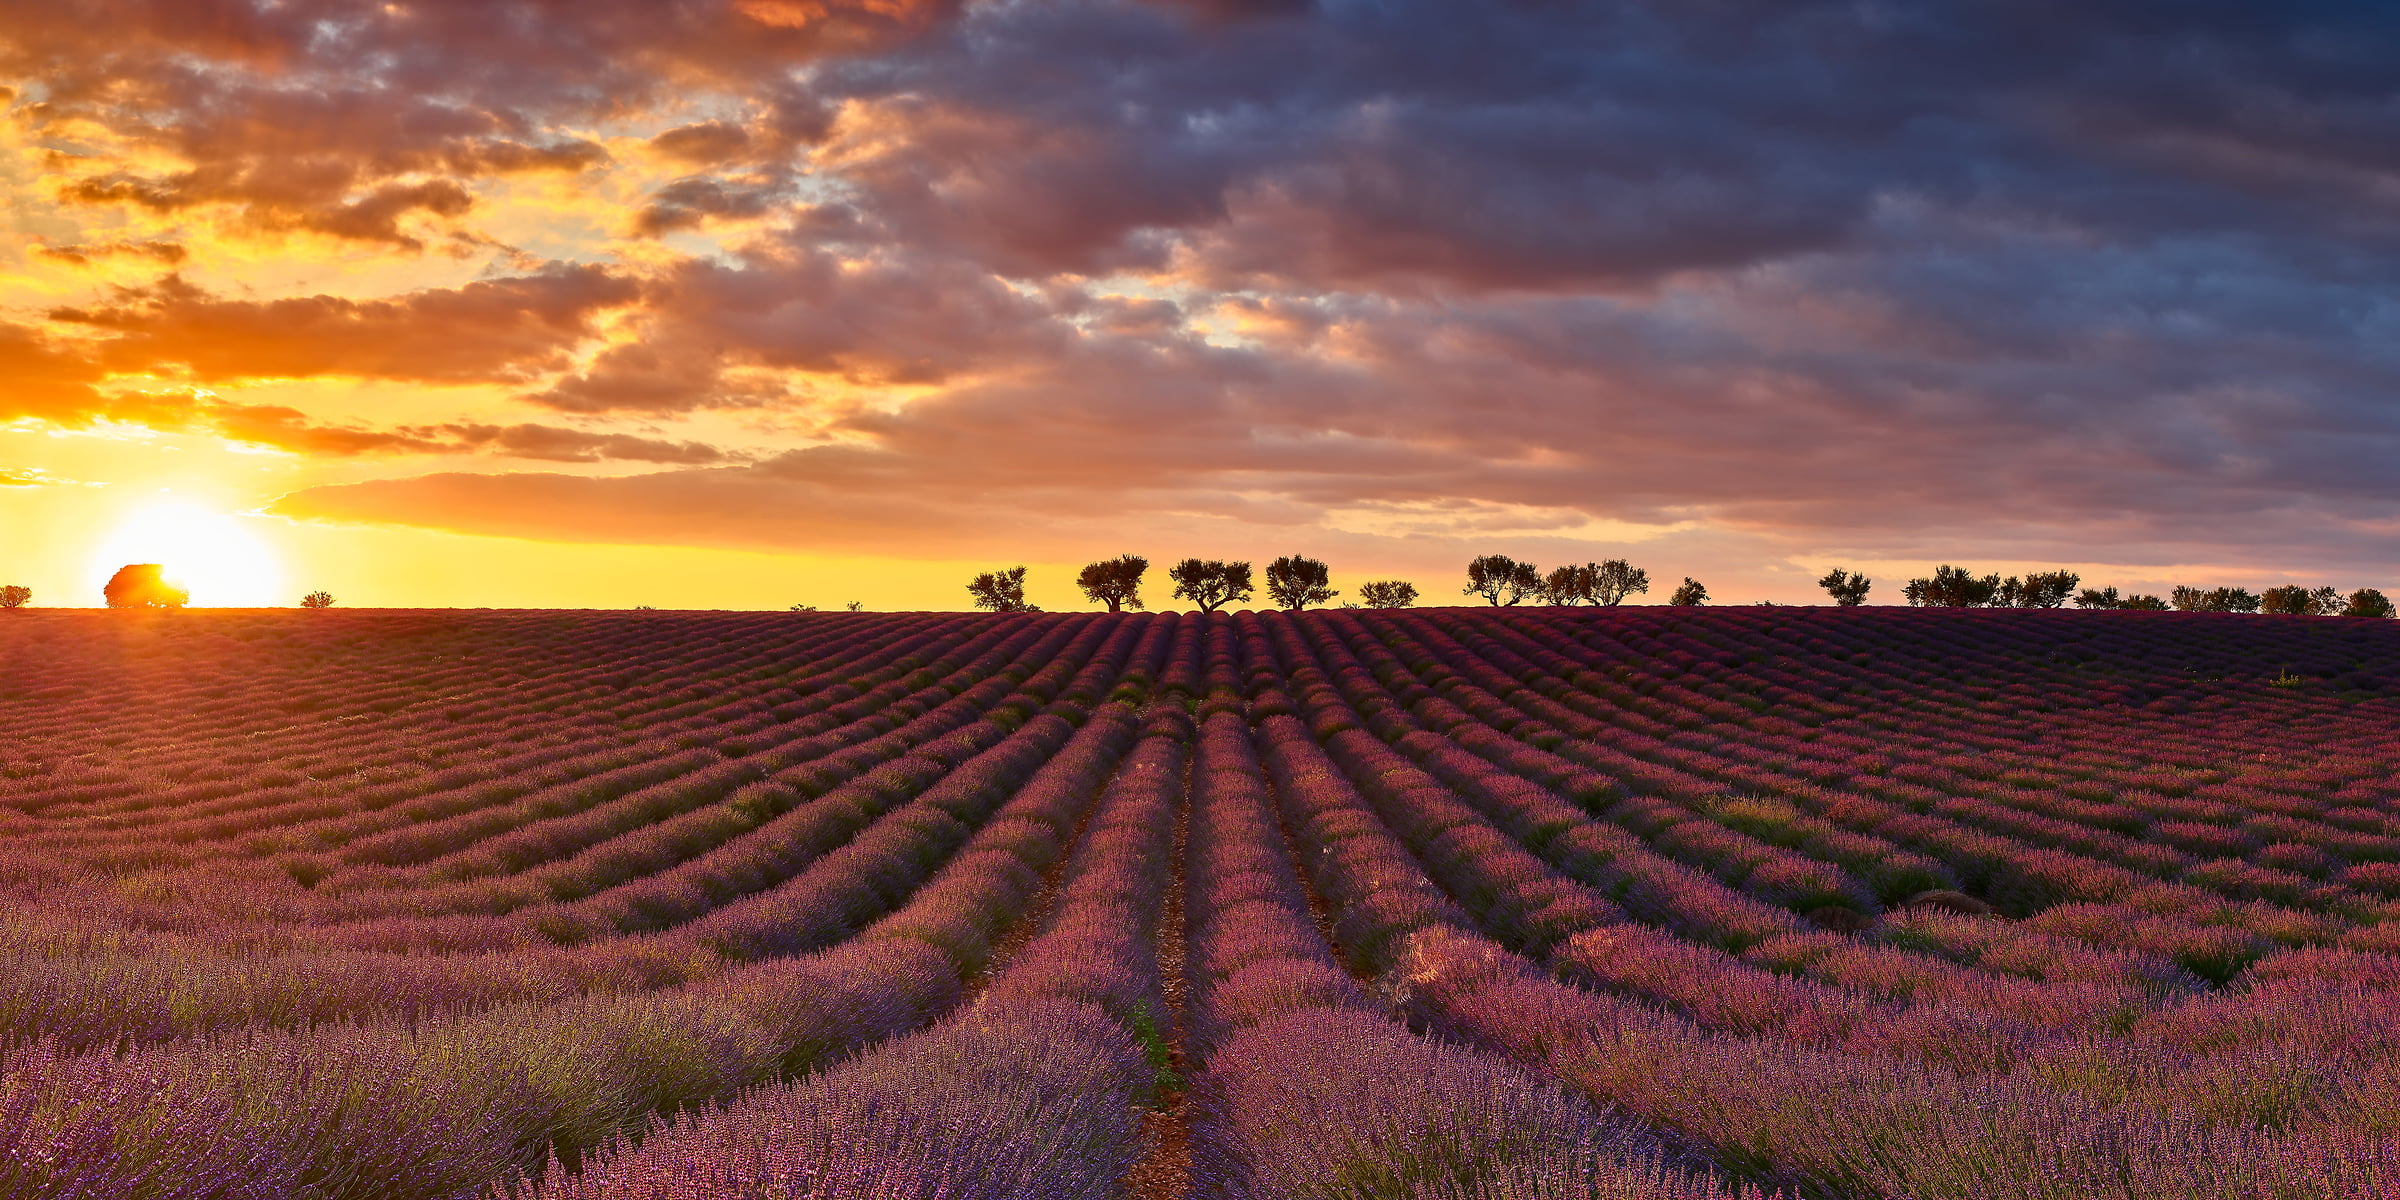 192 megapixels! A very high resolution, large-format VAST photo print of a sunset over lavender fields; landscape photograph created by David Meaux in Valensole Plateau, Valensole, Provence-Alpes-Côte d'Azur, France